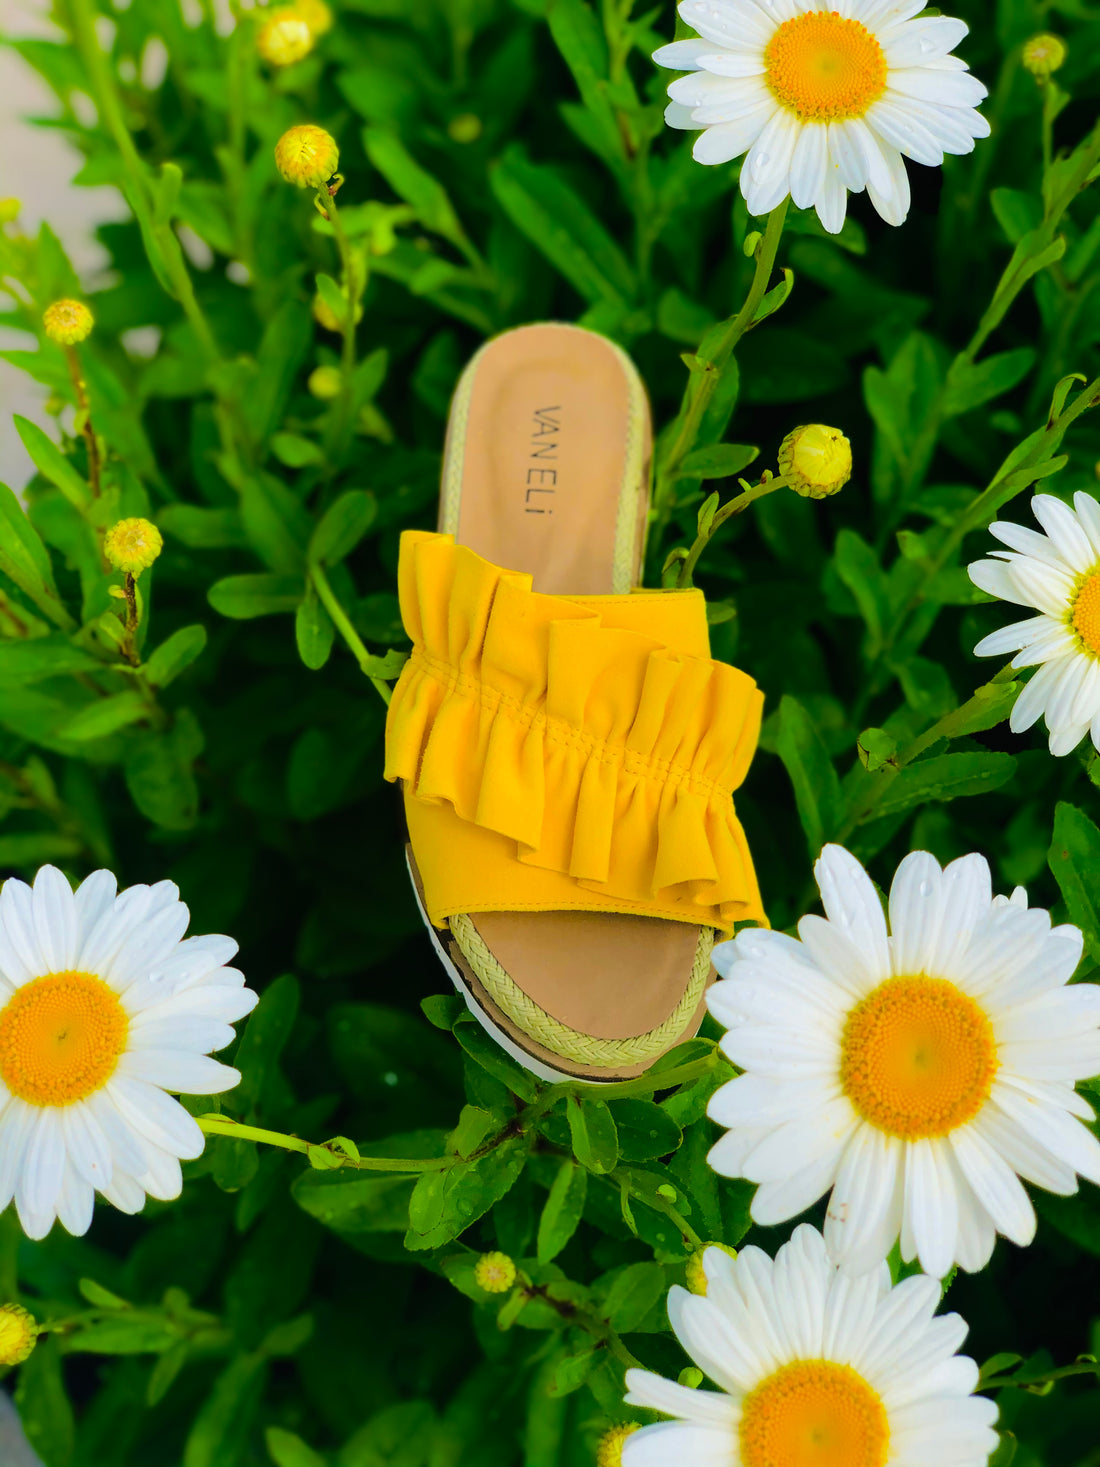 Blog: Summer Shoes that everybody loves